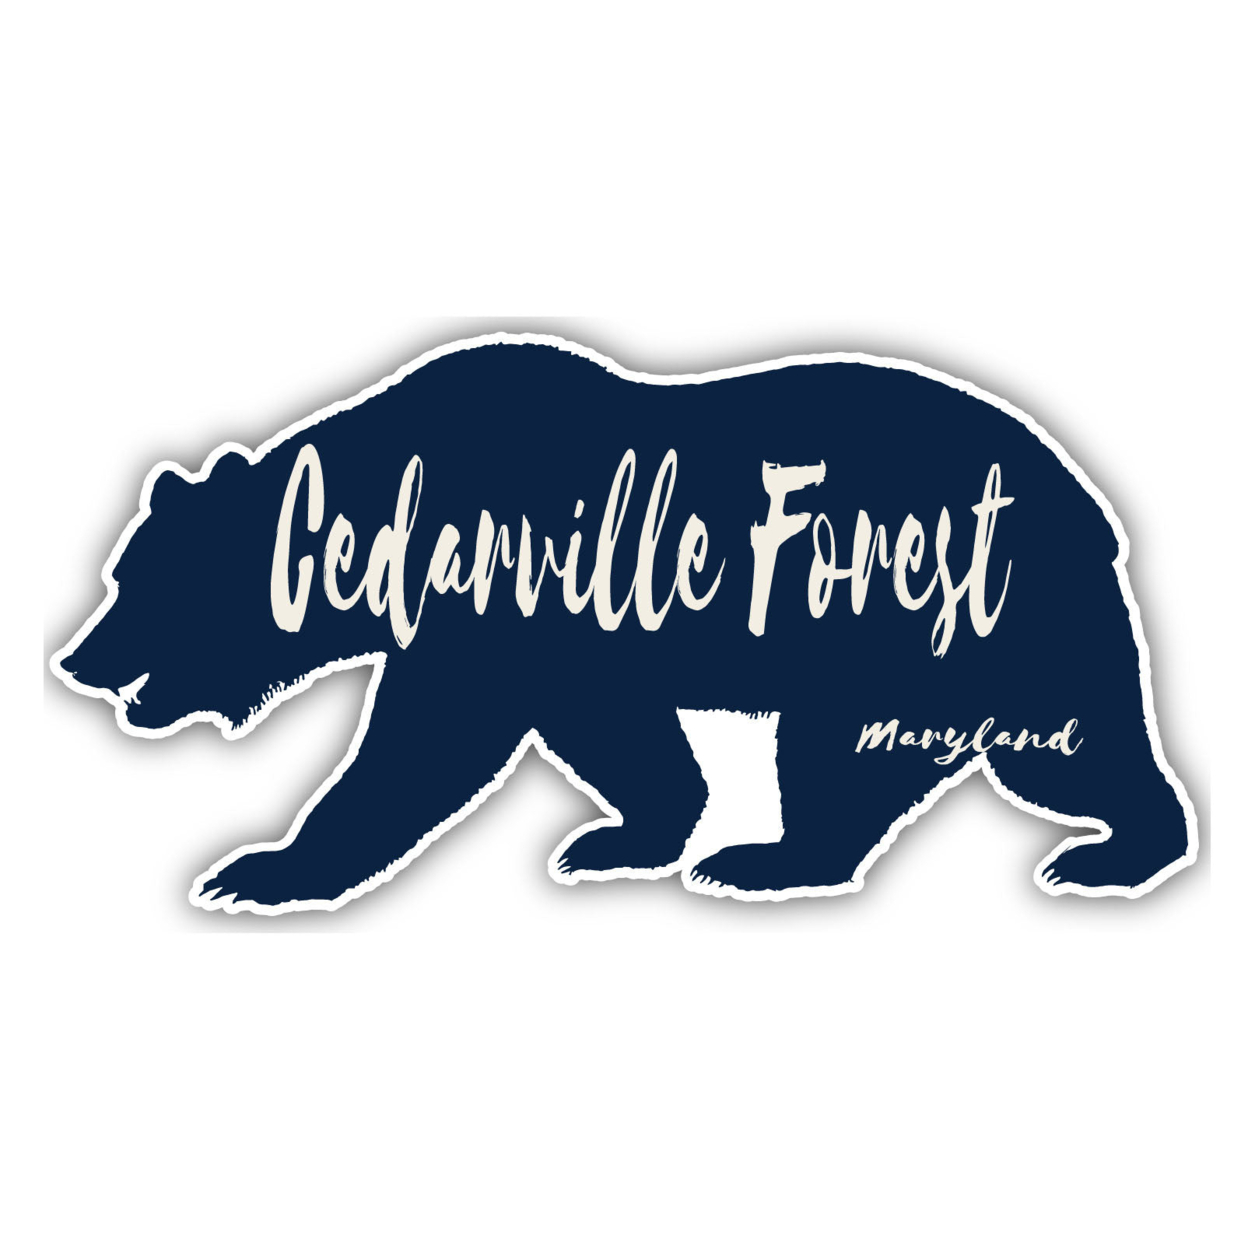 Cedarville Forest Maryland Souvenir Decorative Stickers (Choose Theme And Size) - Single Unit, 10-Inch, Bear